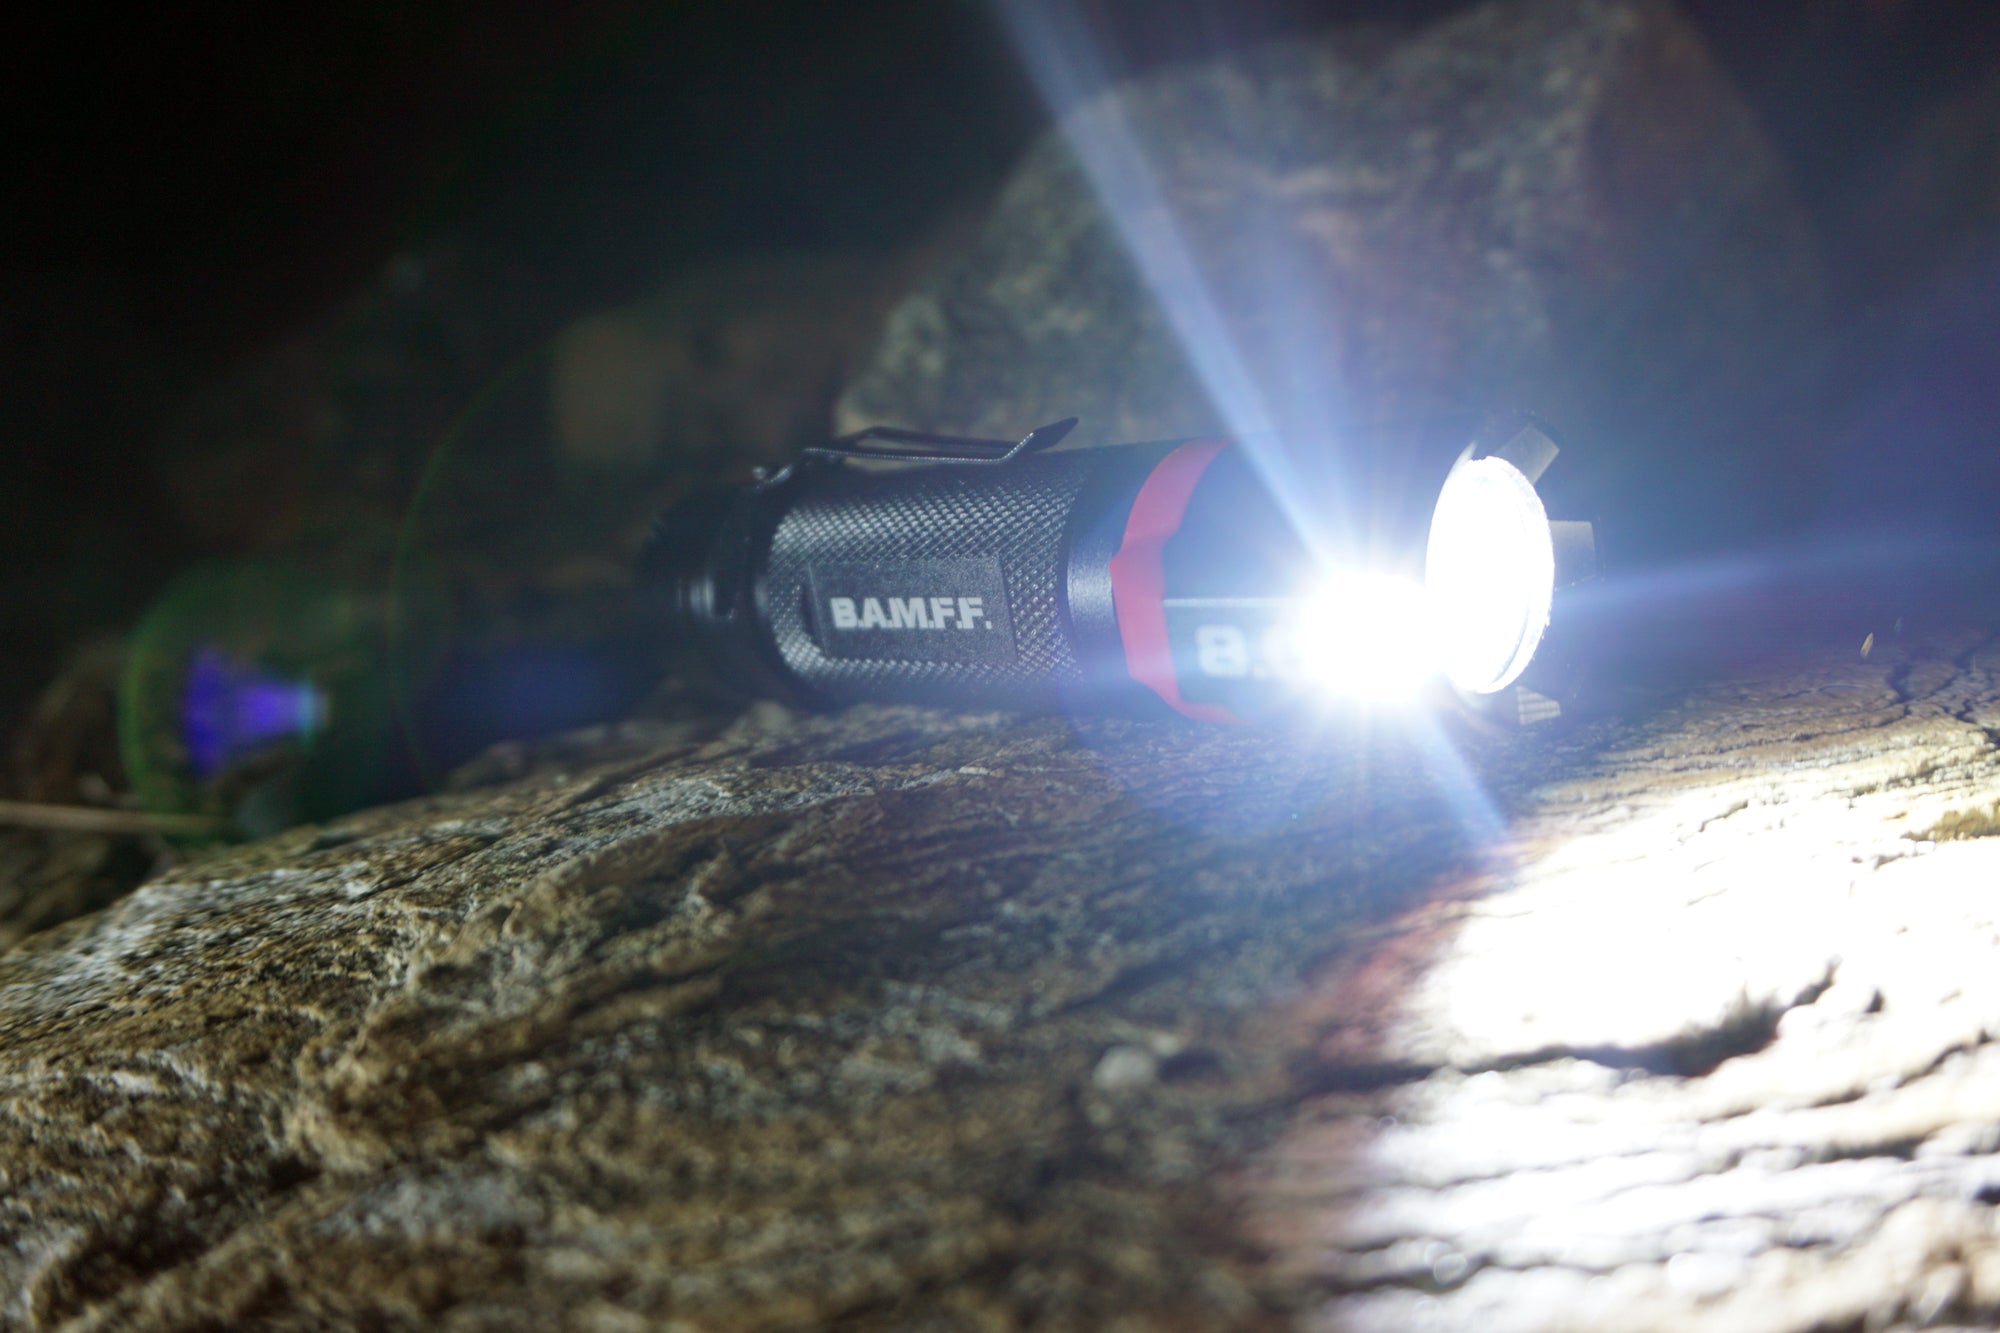 The B.A.M.F.F. Tactical LED flashlight by STKR Concepts sitting on a rock in a night time scene with both flood and spot light on